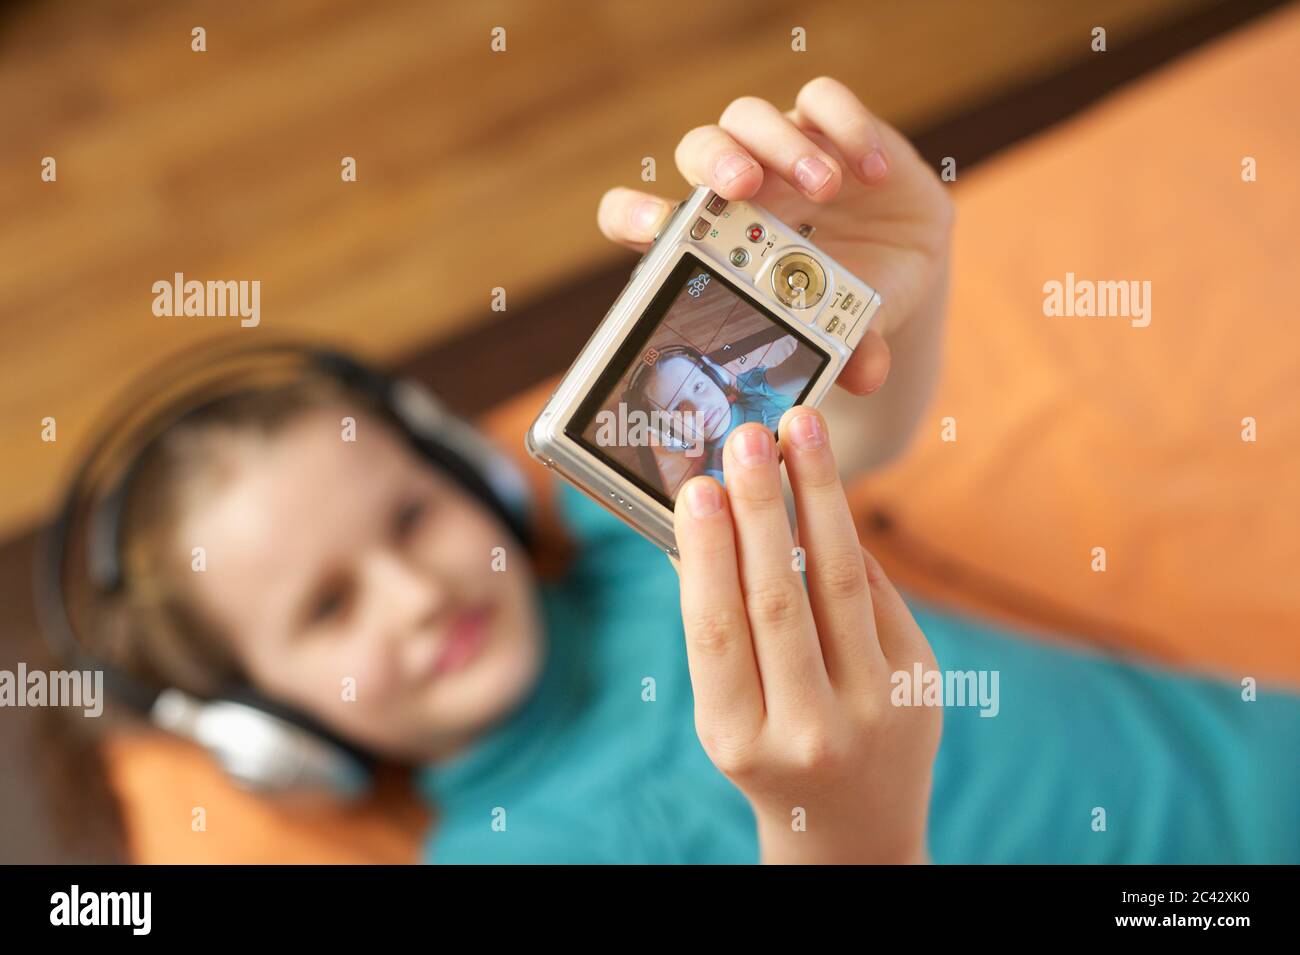 Girl with headphones photographs herself with a digital camera - technology - childhood Stock Photo